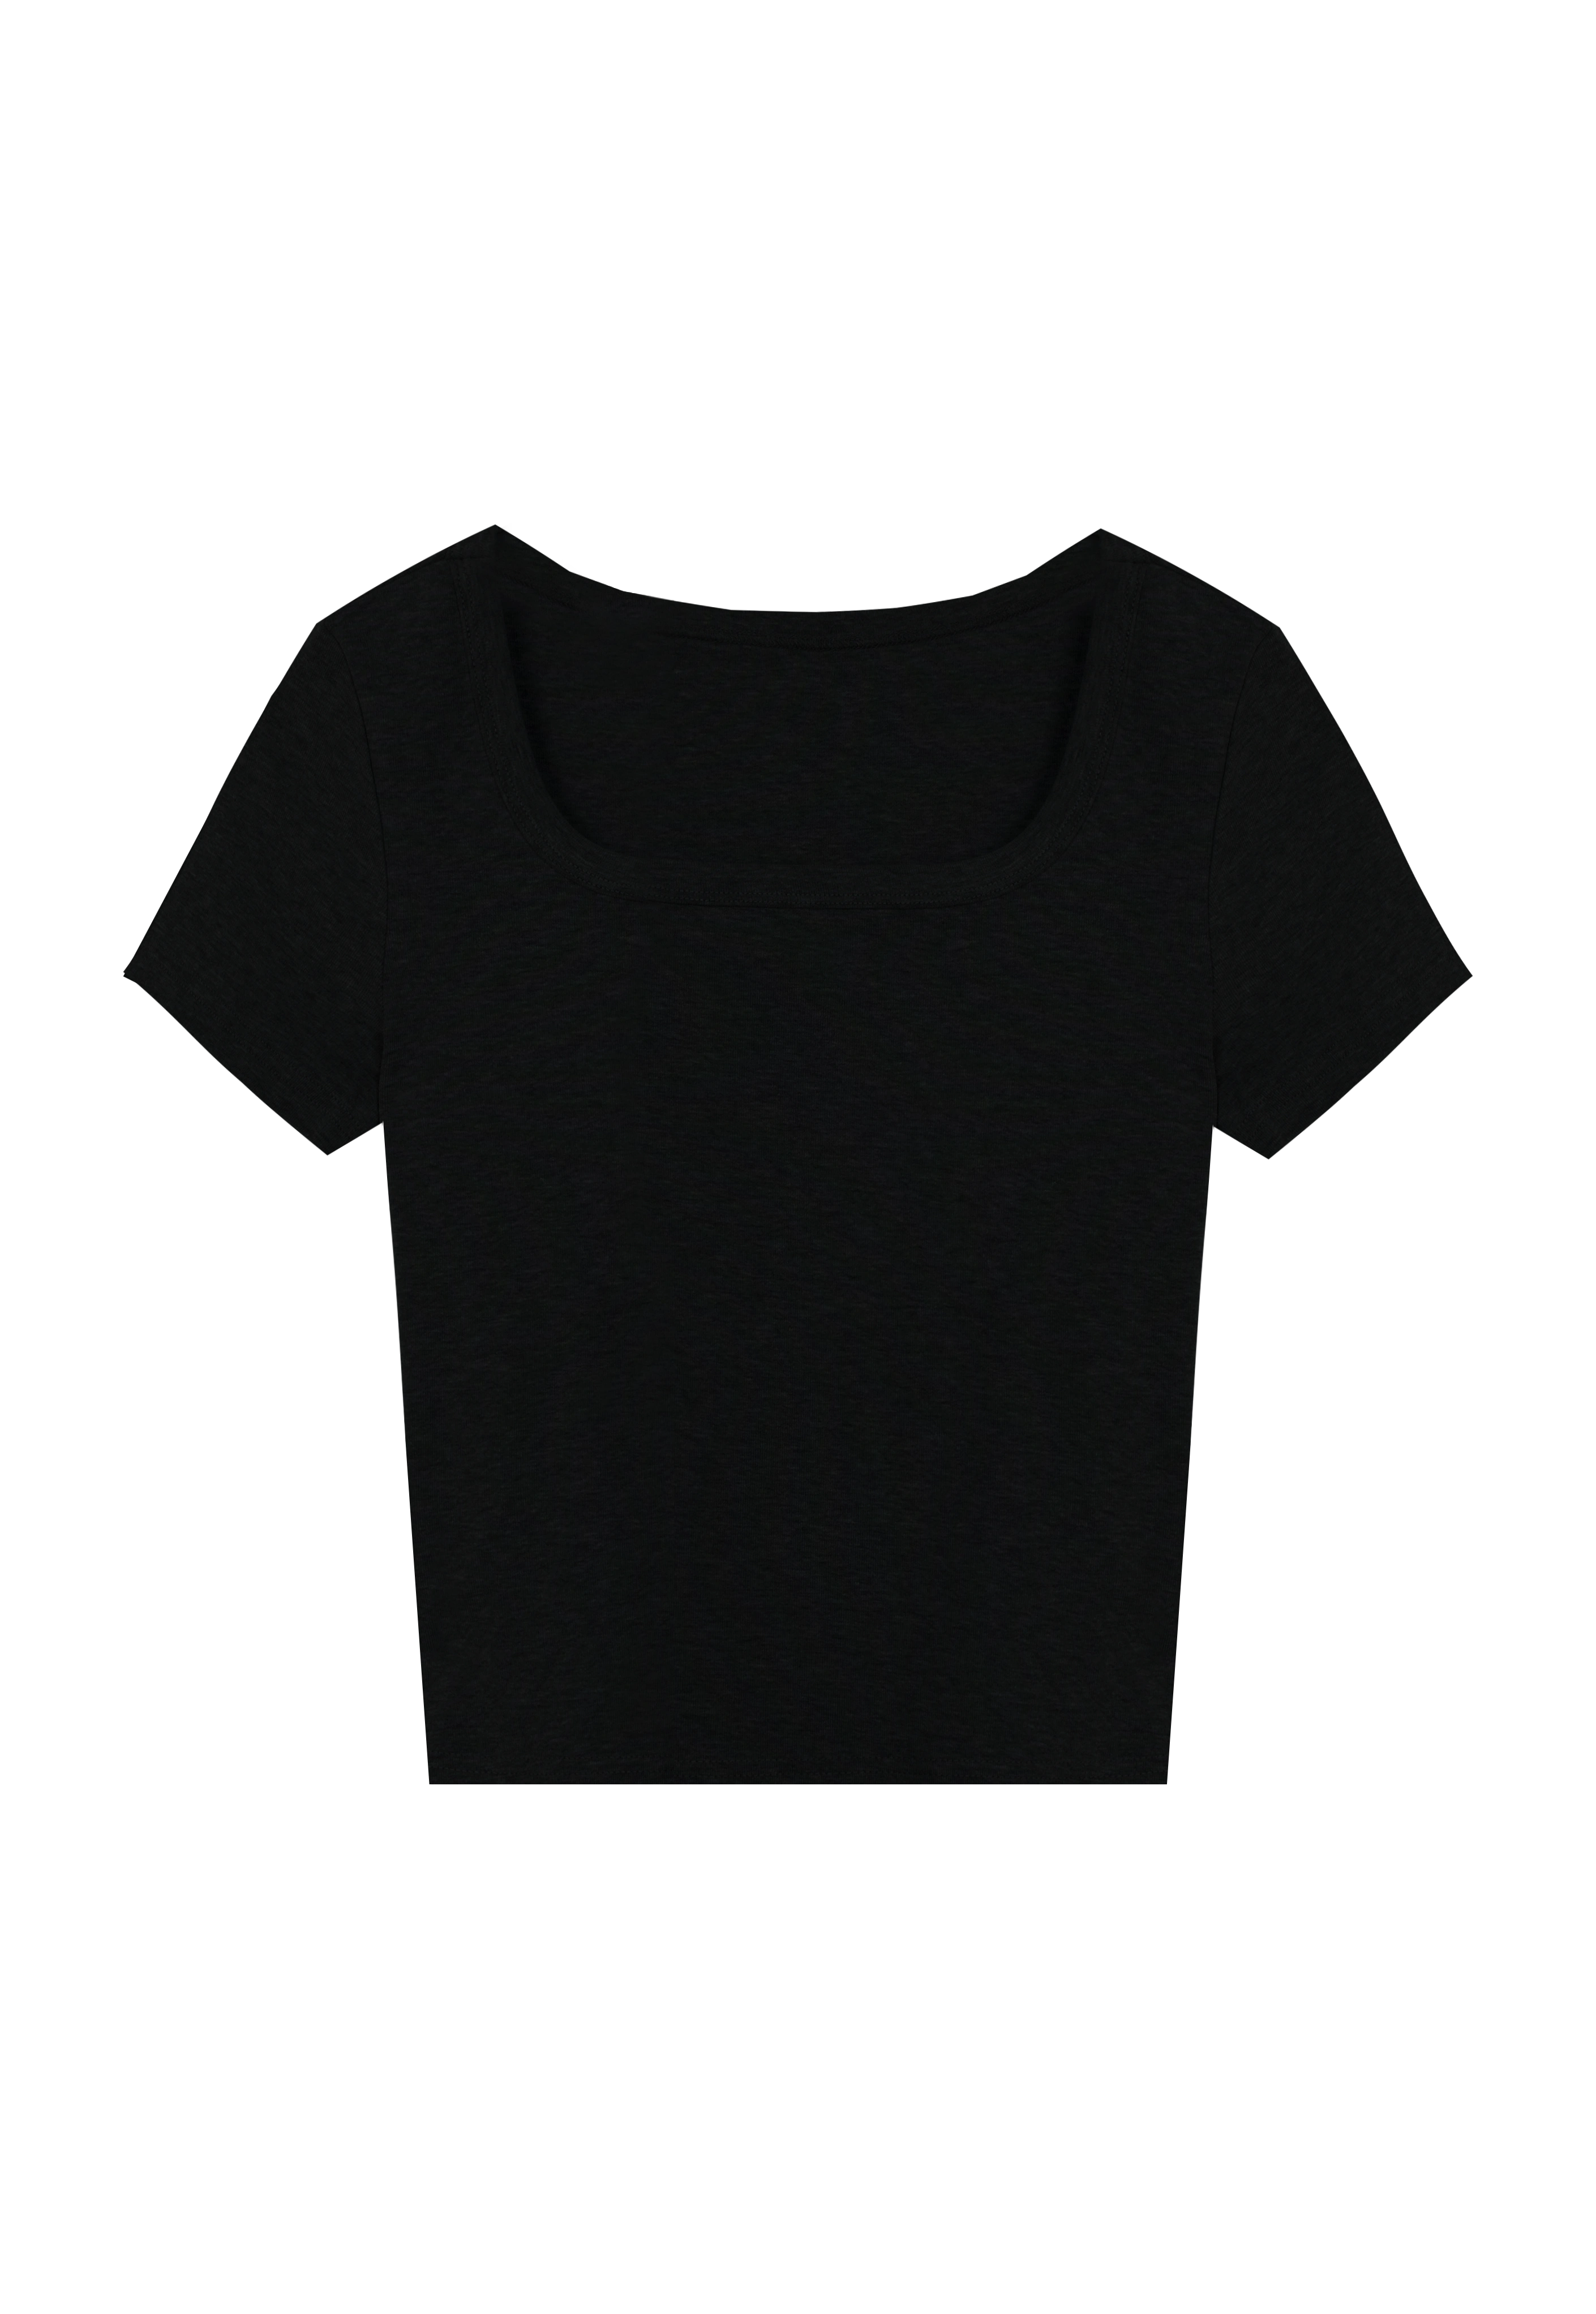 Women's Short Sleeve Fitted Crop Top